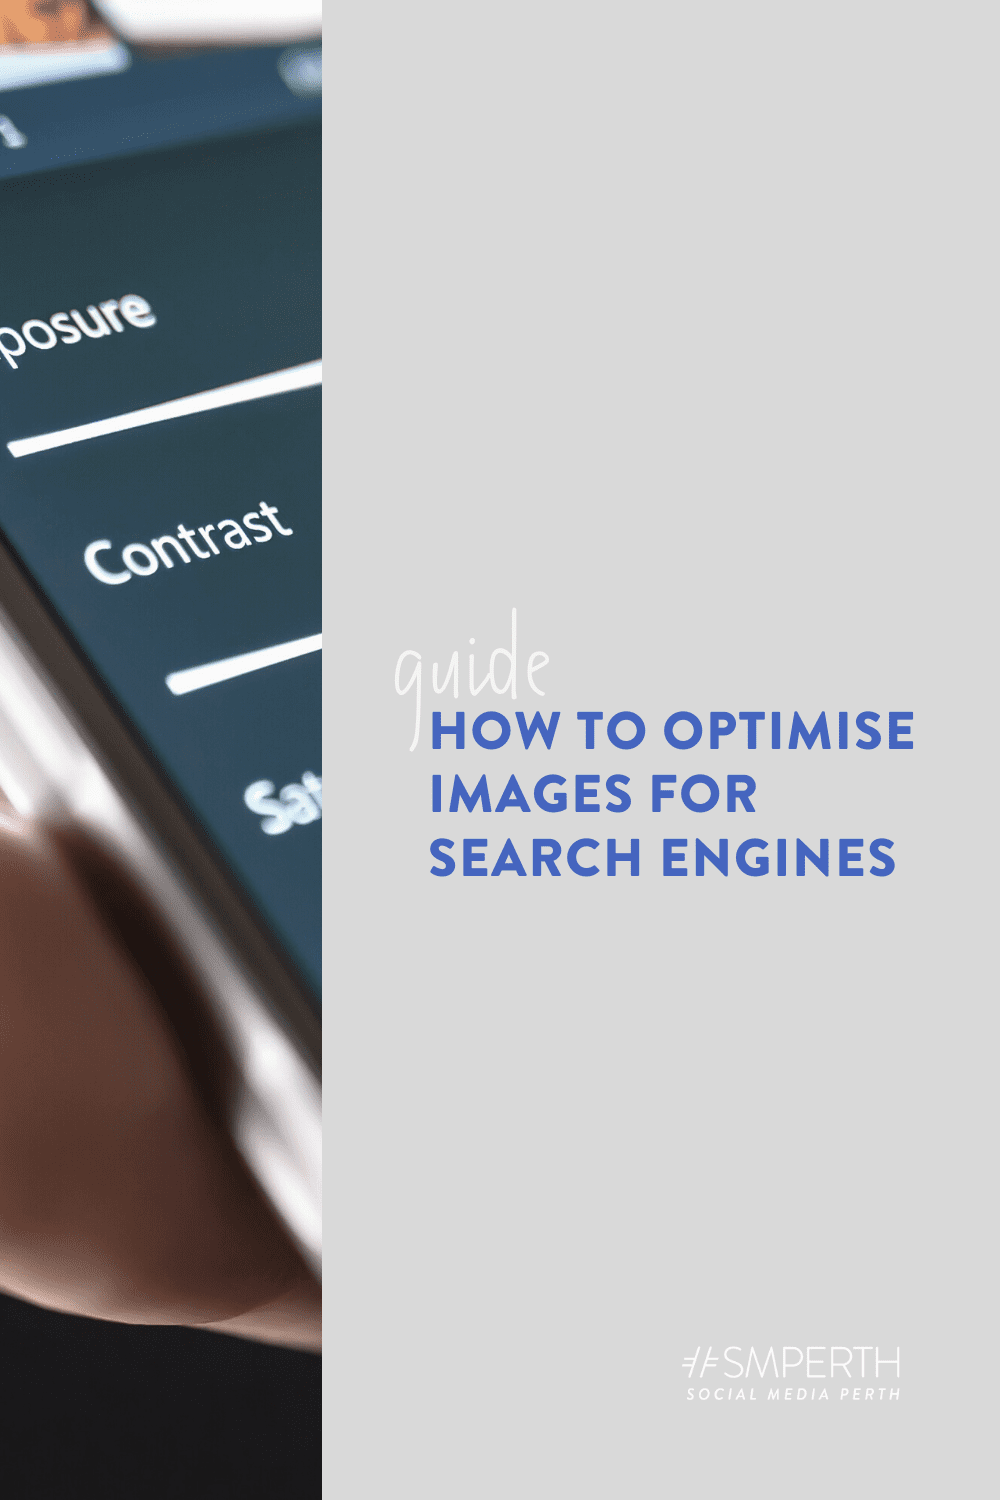 Image SEO // Optimising Images for Search Engines